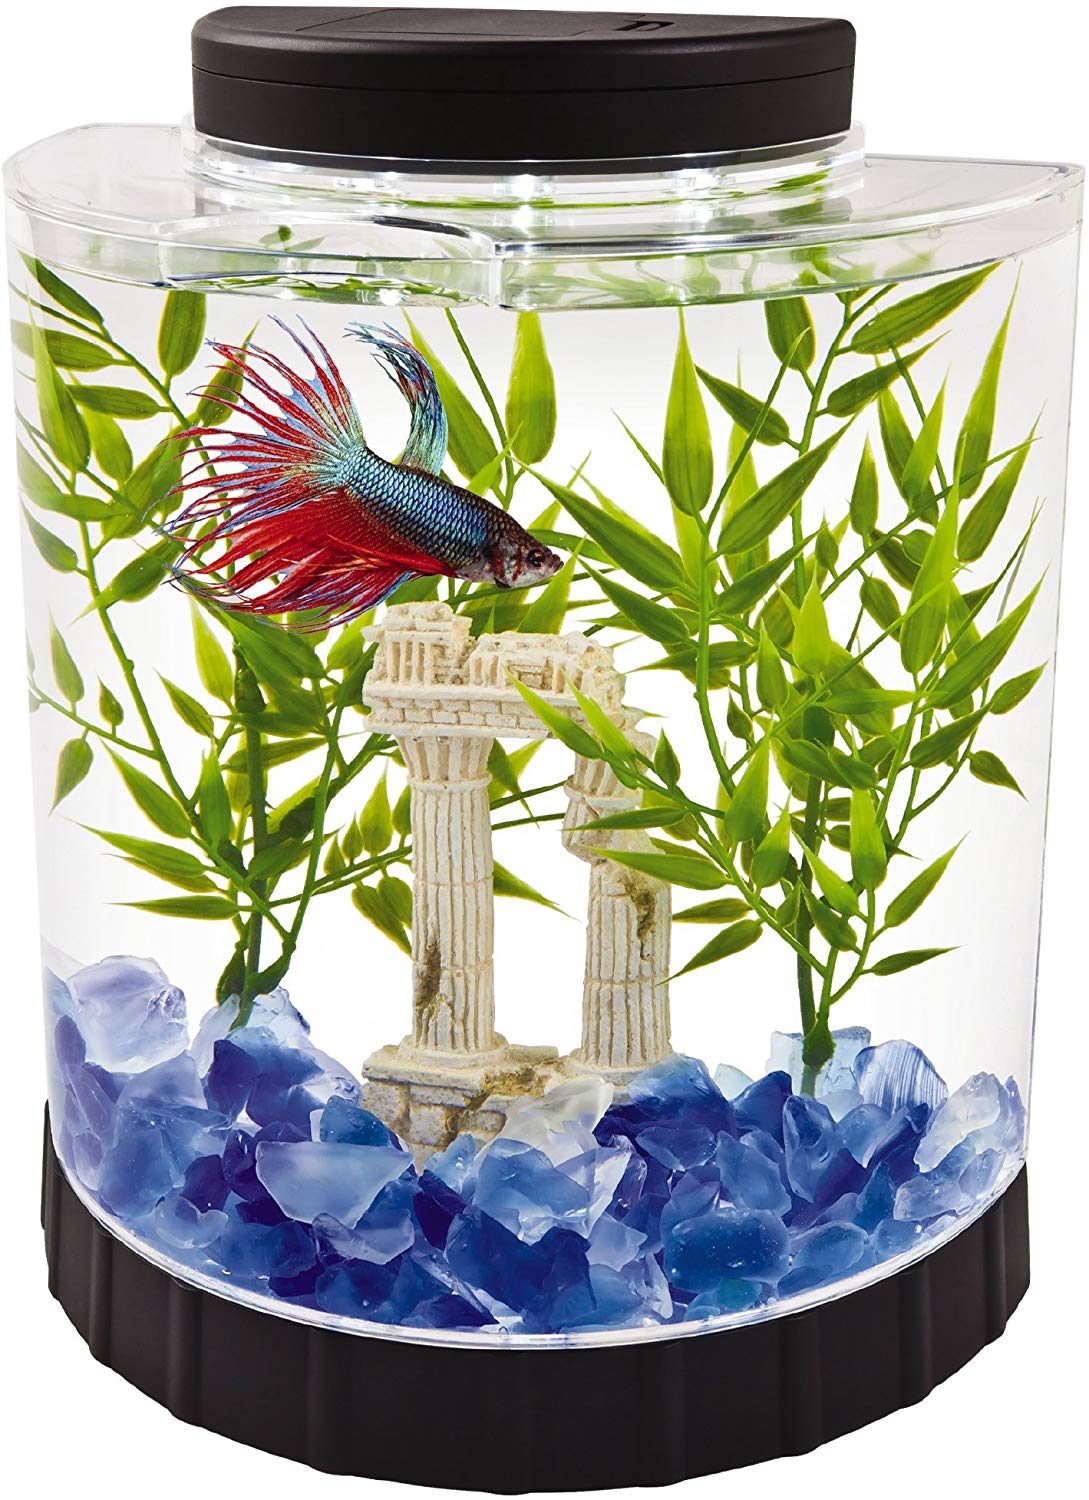 The Best Fish Tanks for Small Fishes | iPetCompanion